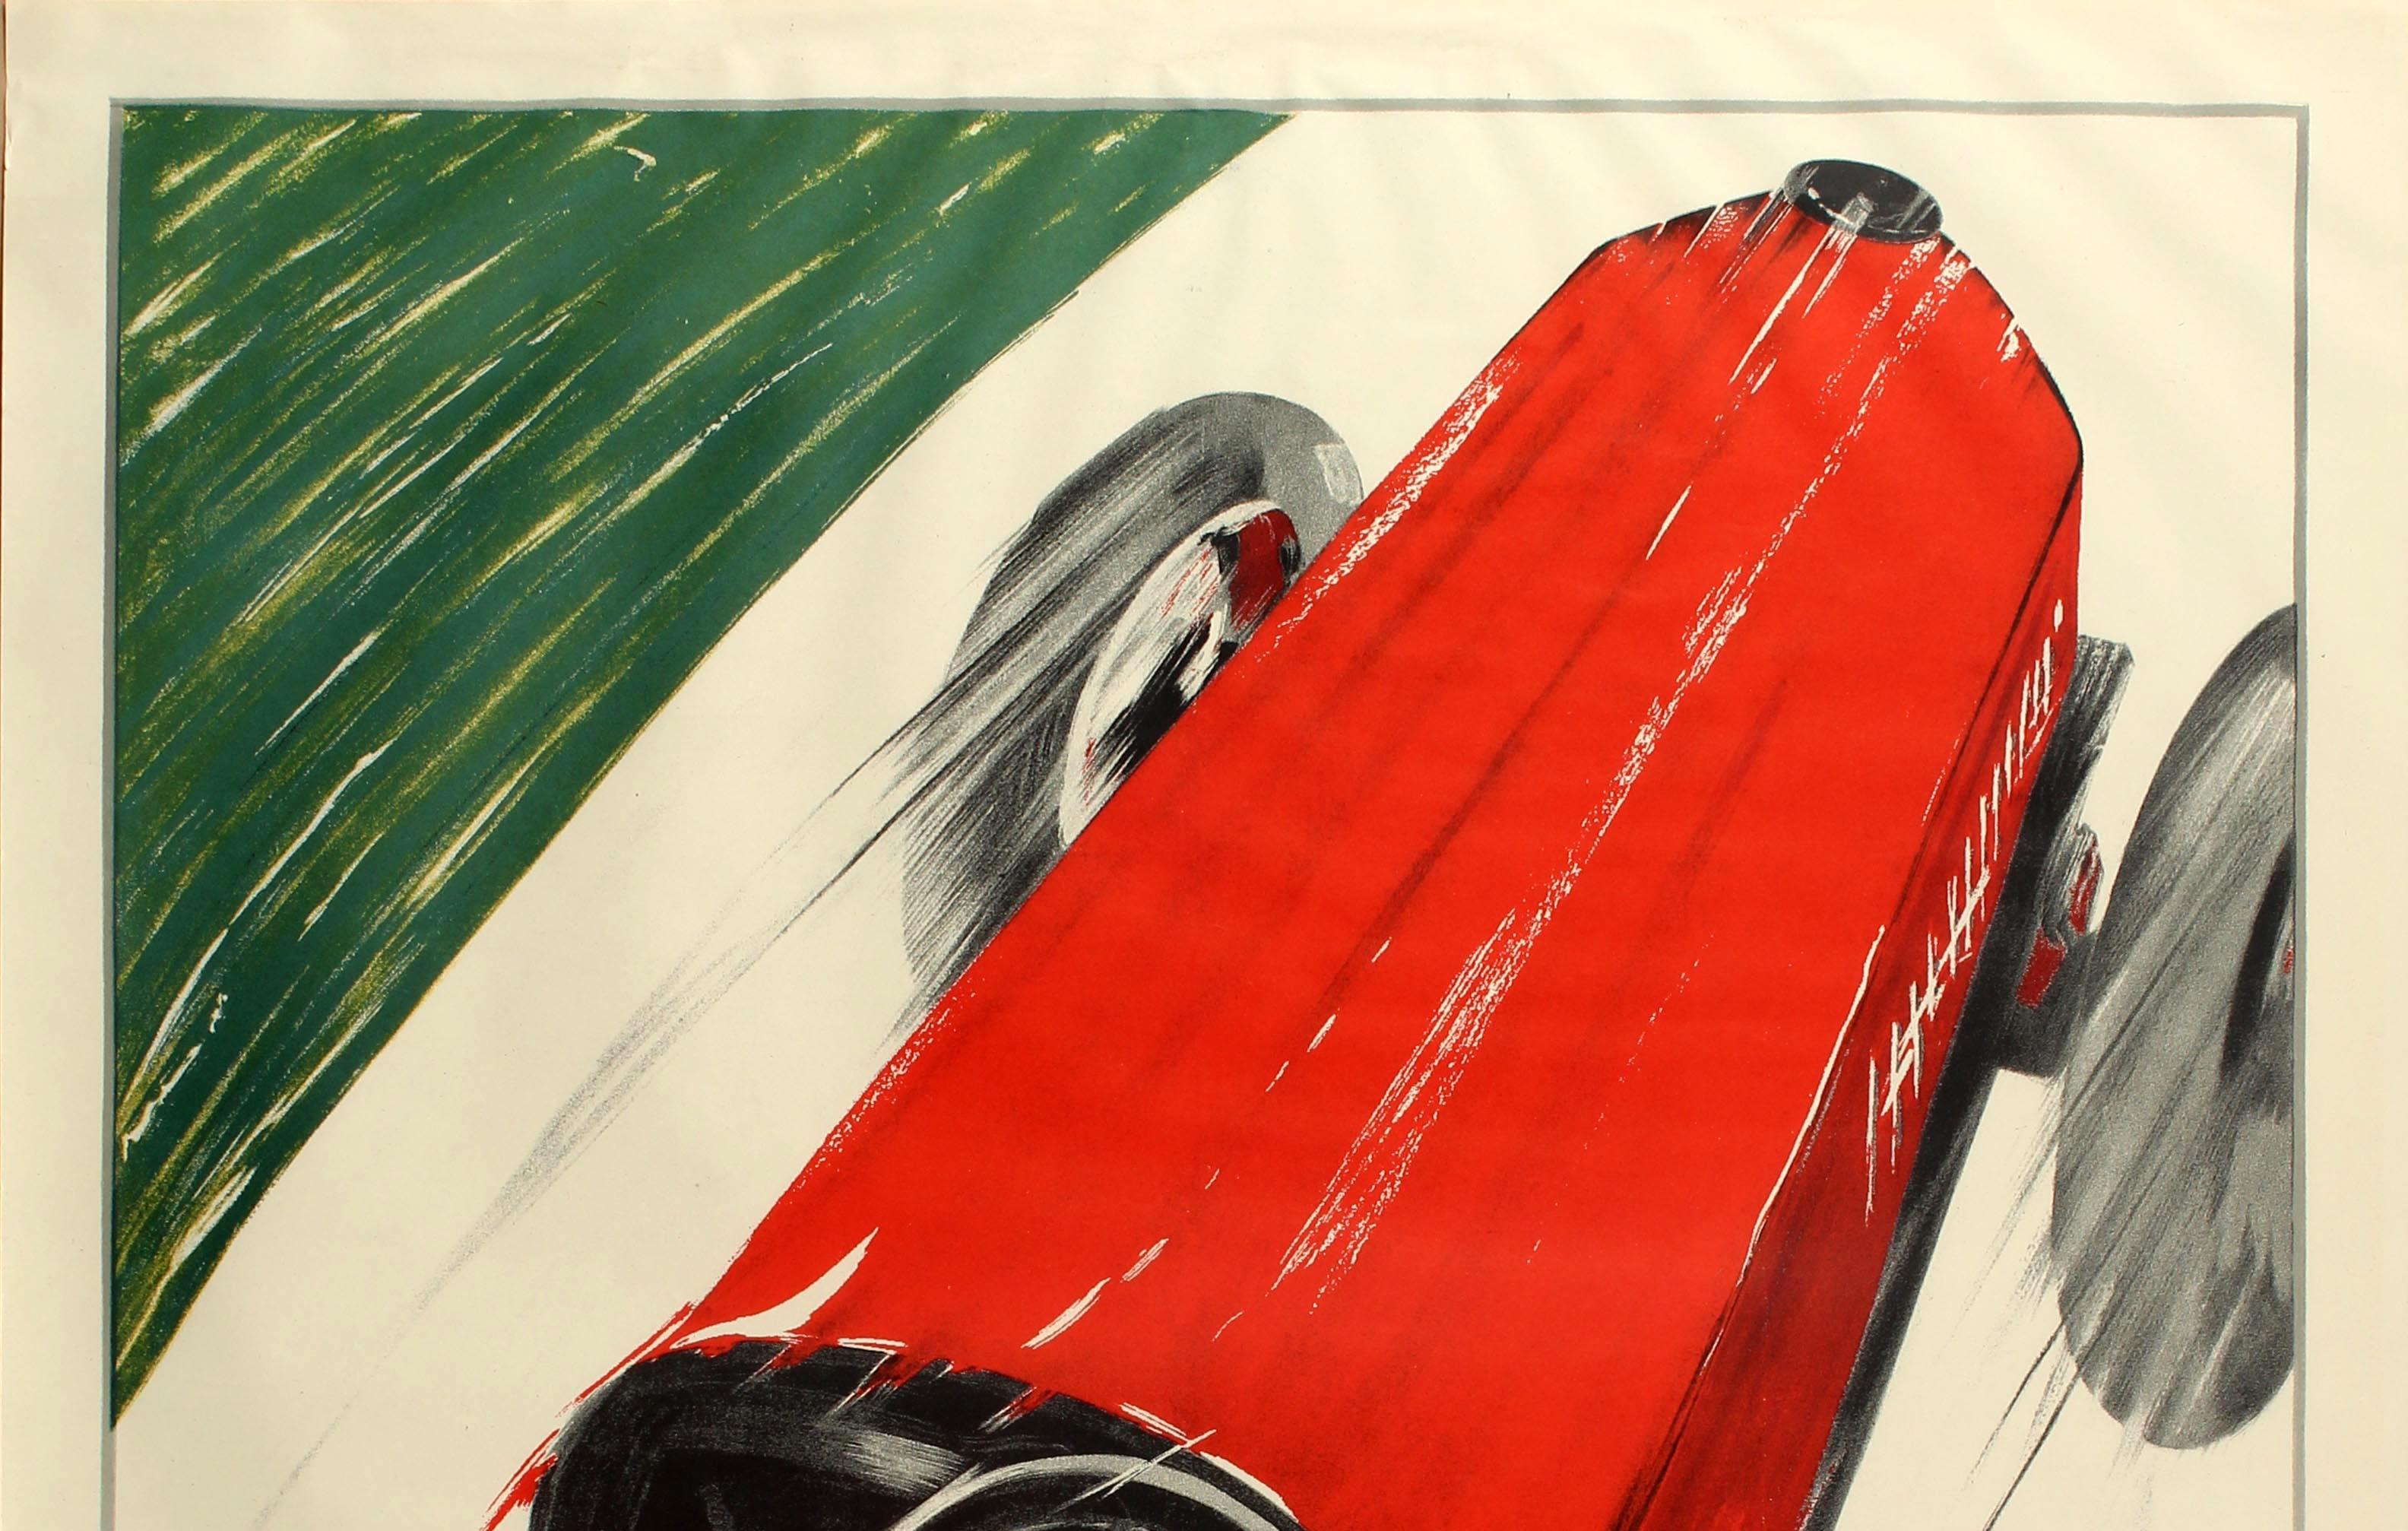 Original vintage 1990s lithograph re-issue of the 1925 sport advertising poster for the annual Coppa della Perugina classic car racing event organized by the Auto Moto Club in Perugia Italy. Great Art Deco style design by the notable Italian artist